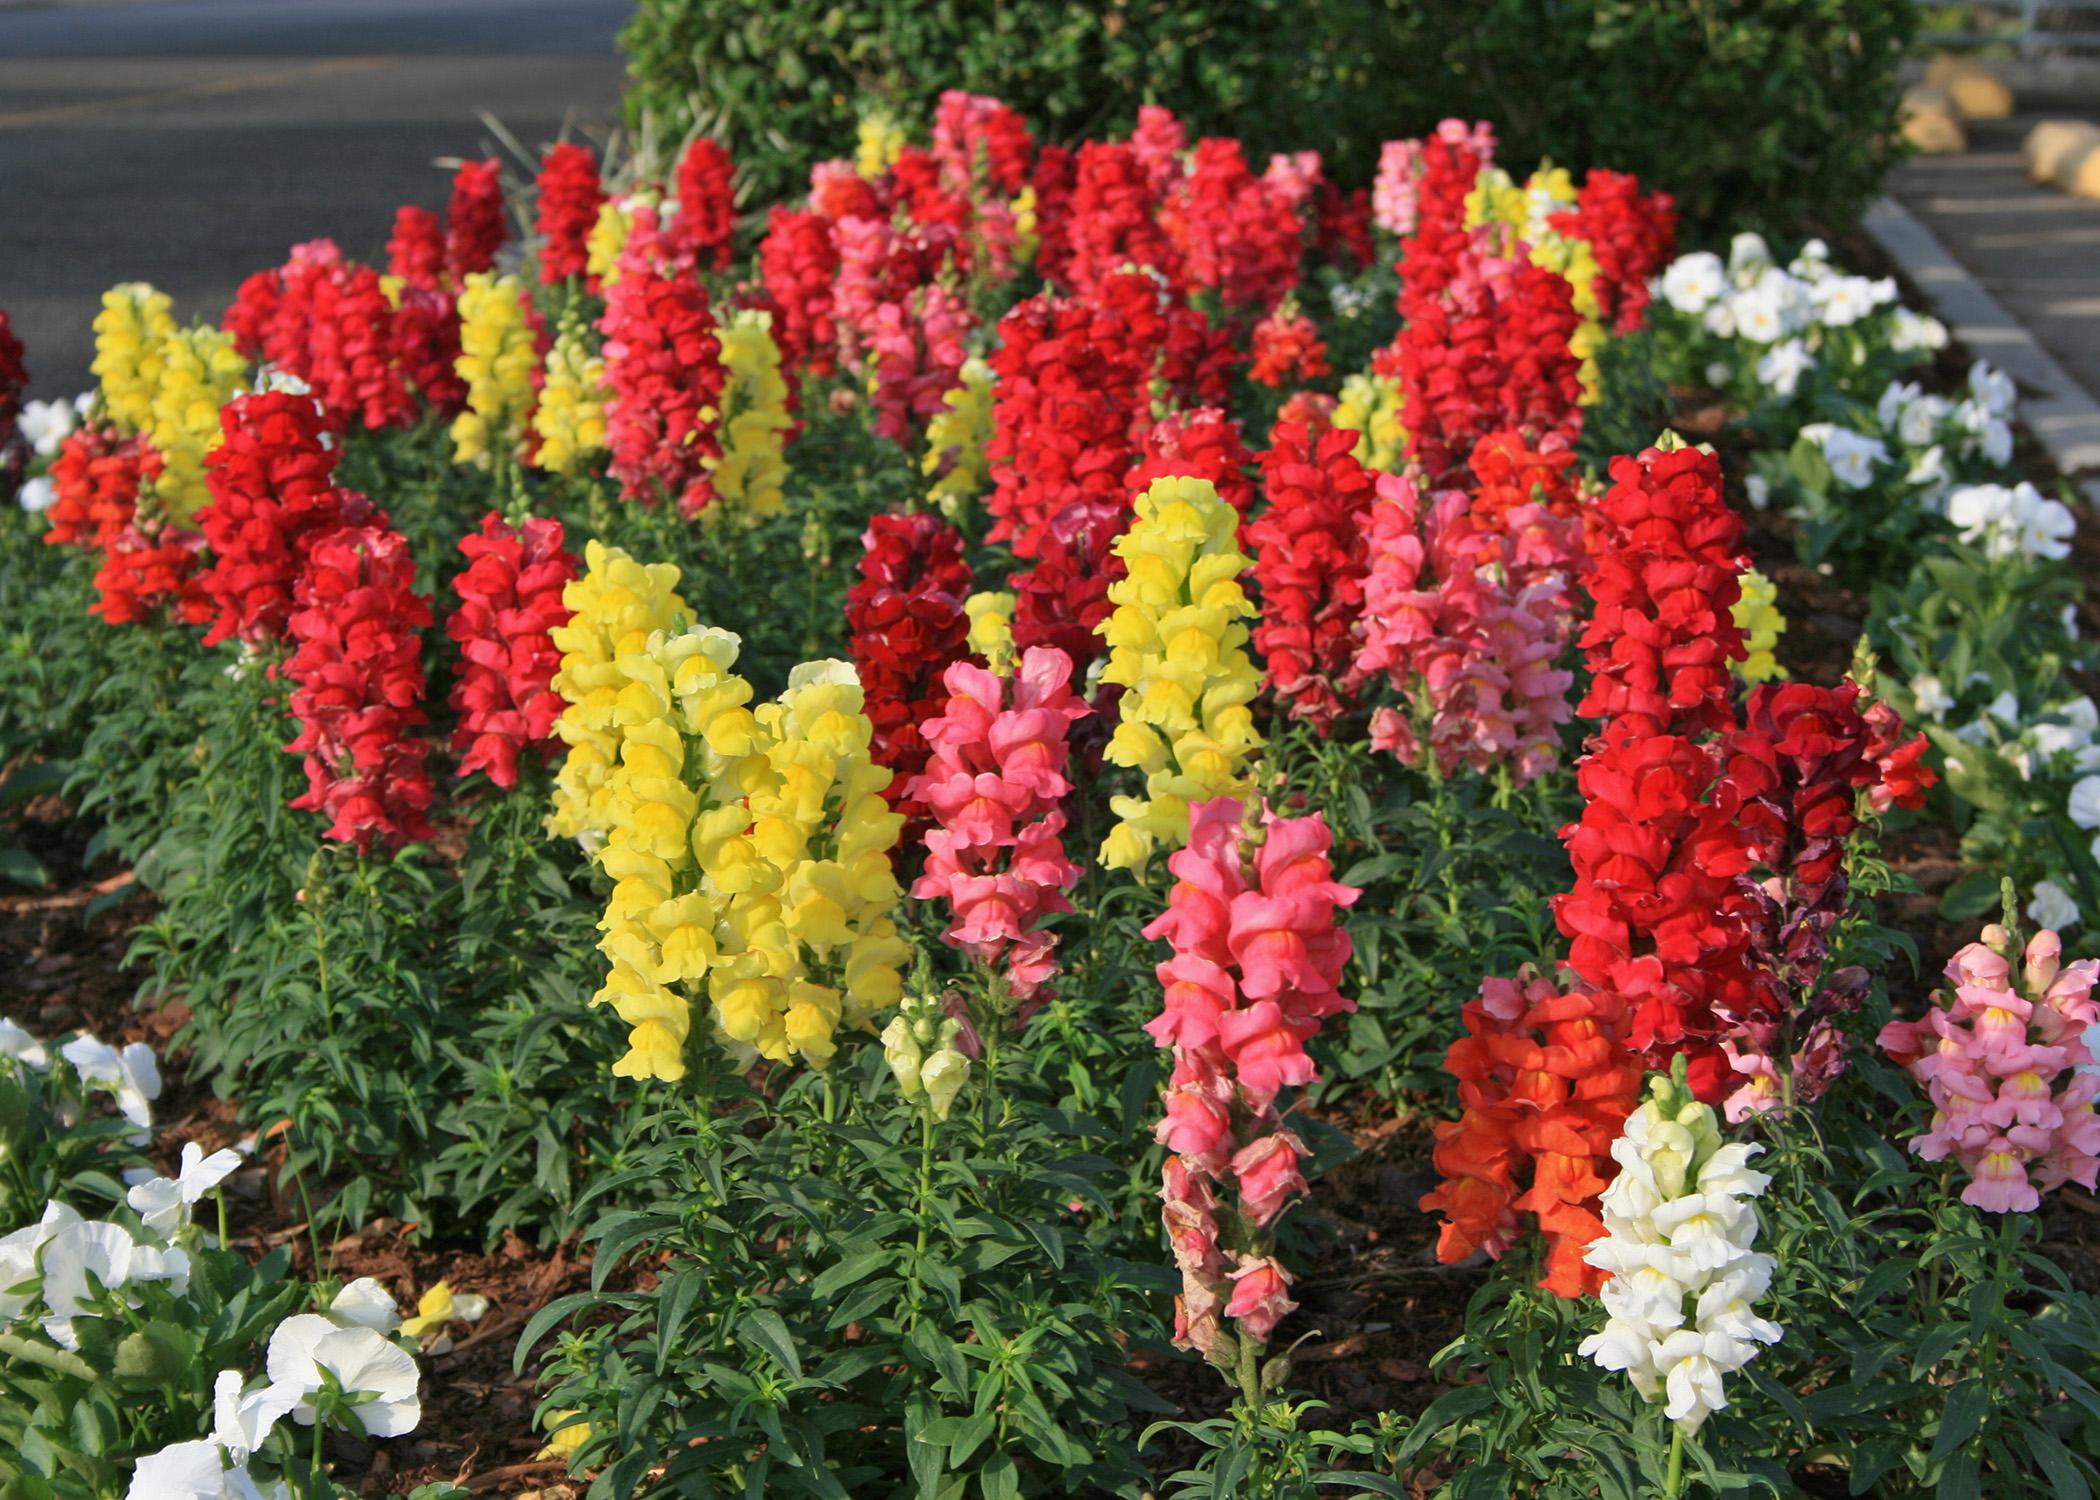 Sonnet snapdragon plants grow up to 30 inches tall and offer colorful flower spikes in a kaleidoscope of shades that are great as cut flowers. They are thrilling in a cool-season combination container and have a soft cinnamon scent. (Photo by MSU Extension Service/Gary Bachman)